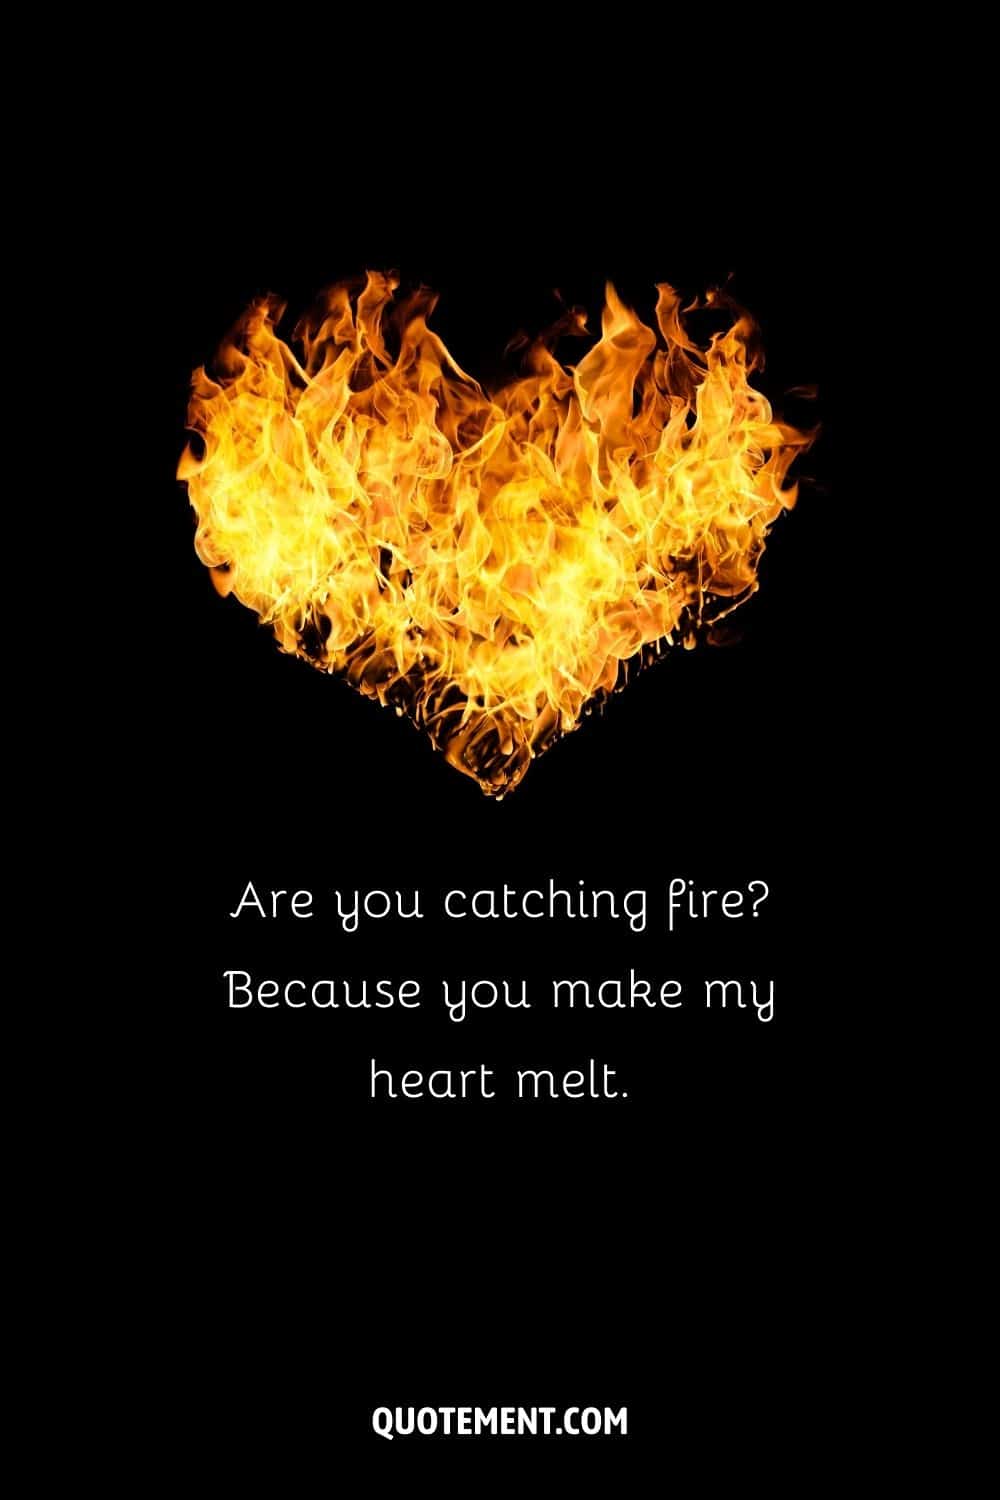 heart-shaped fire on a black background